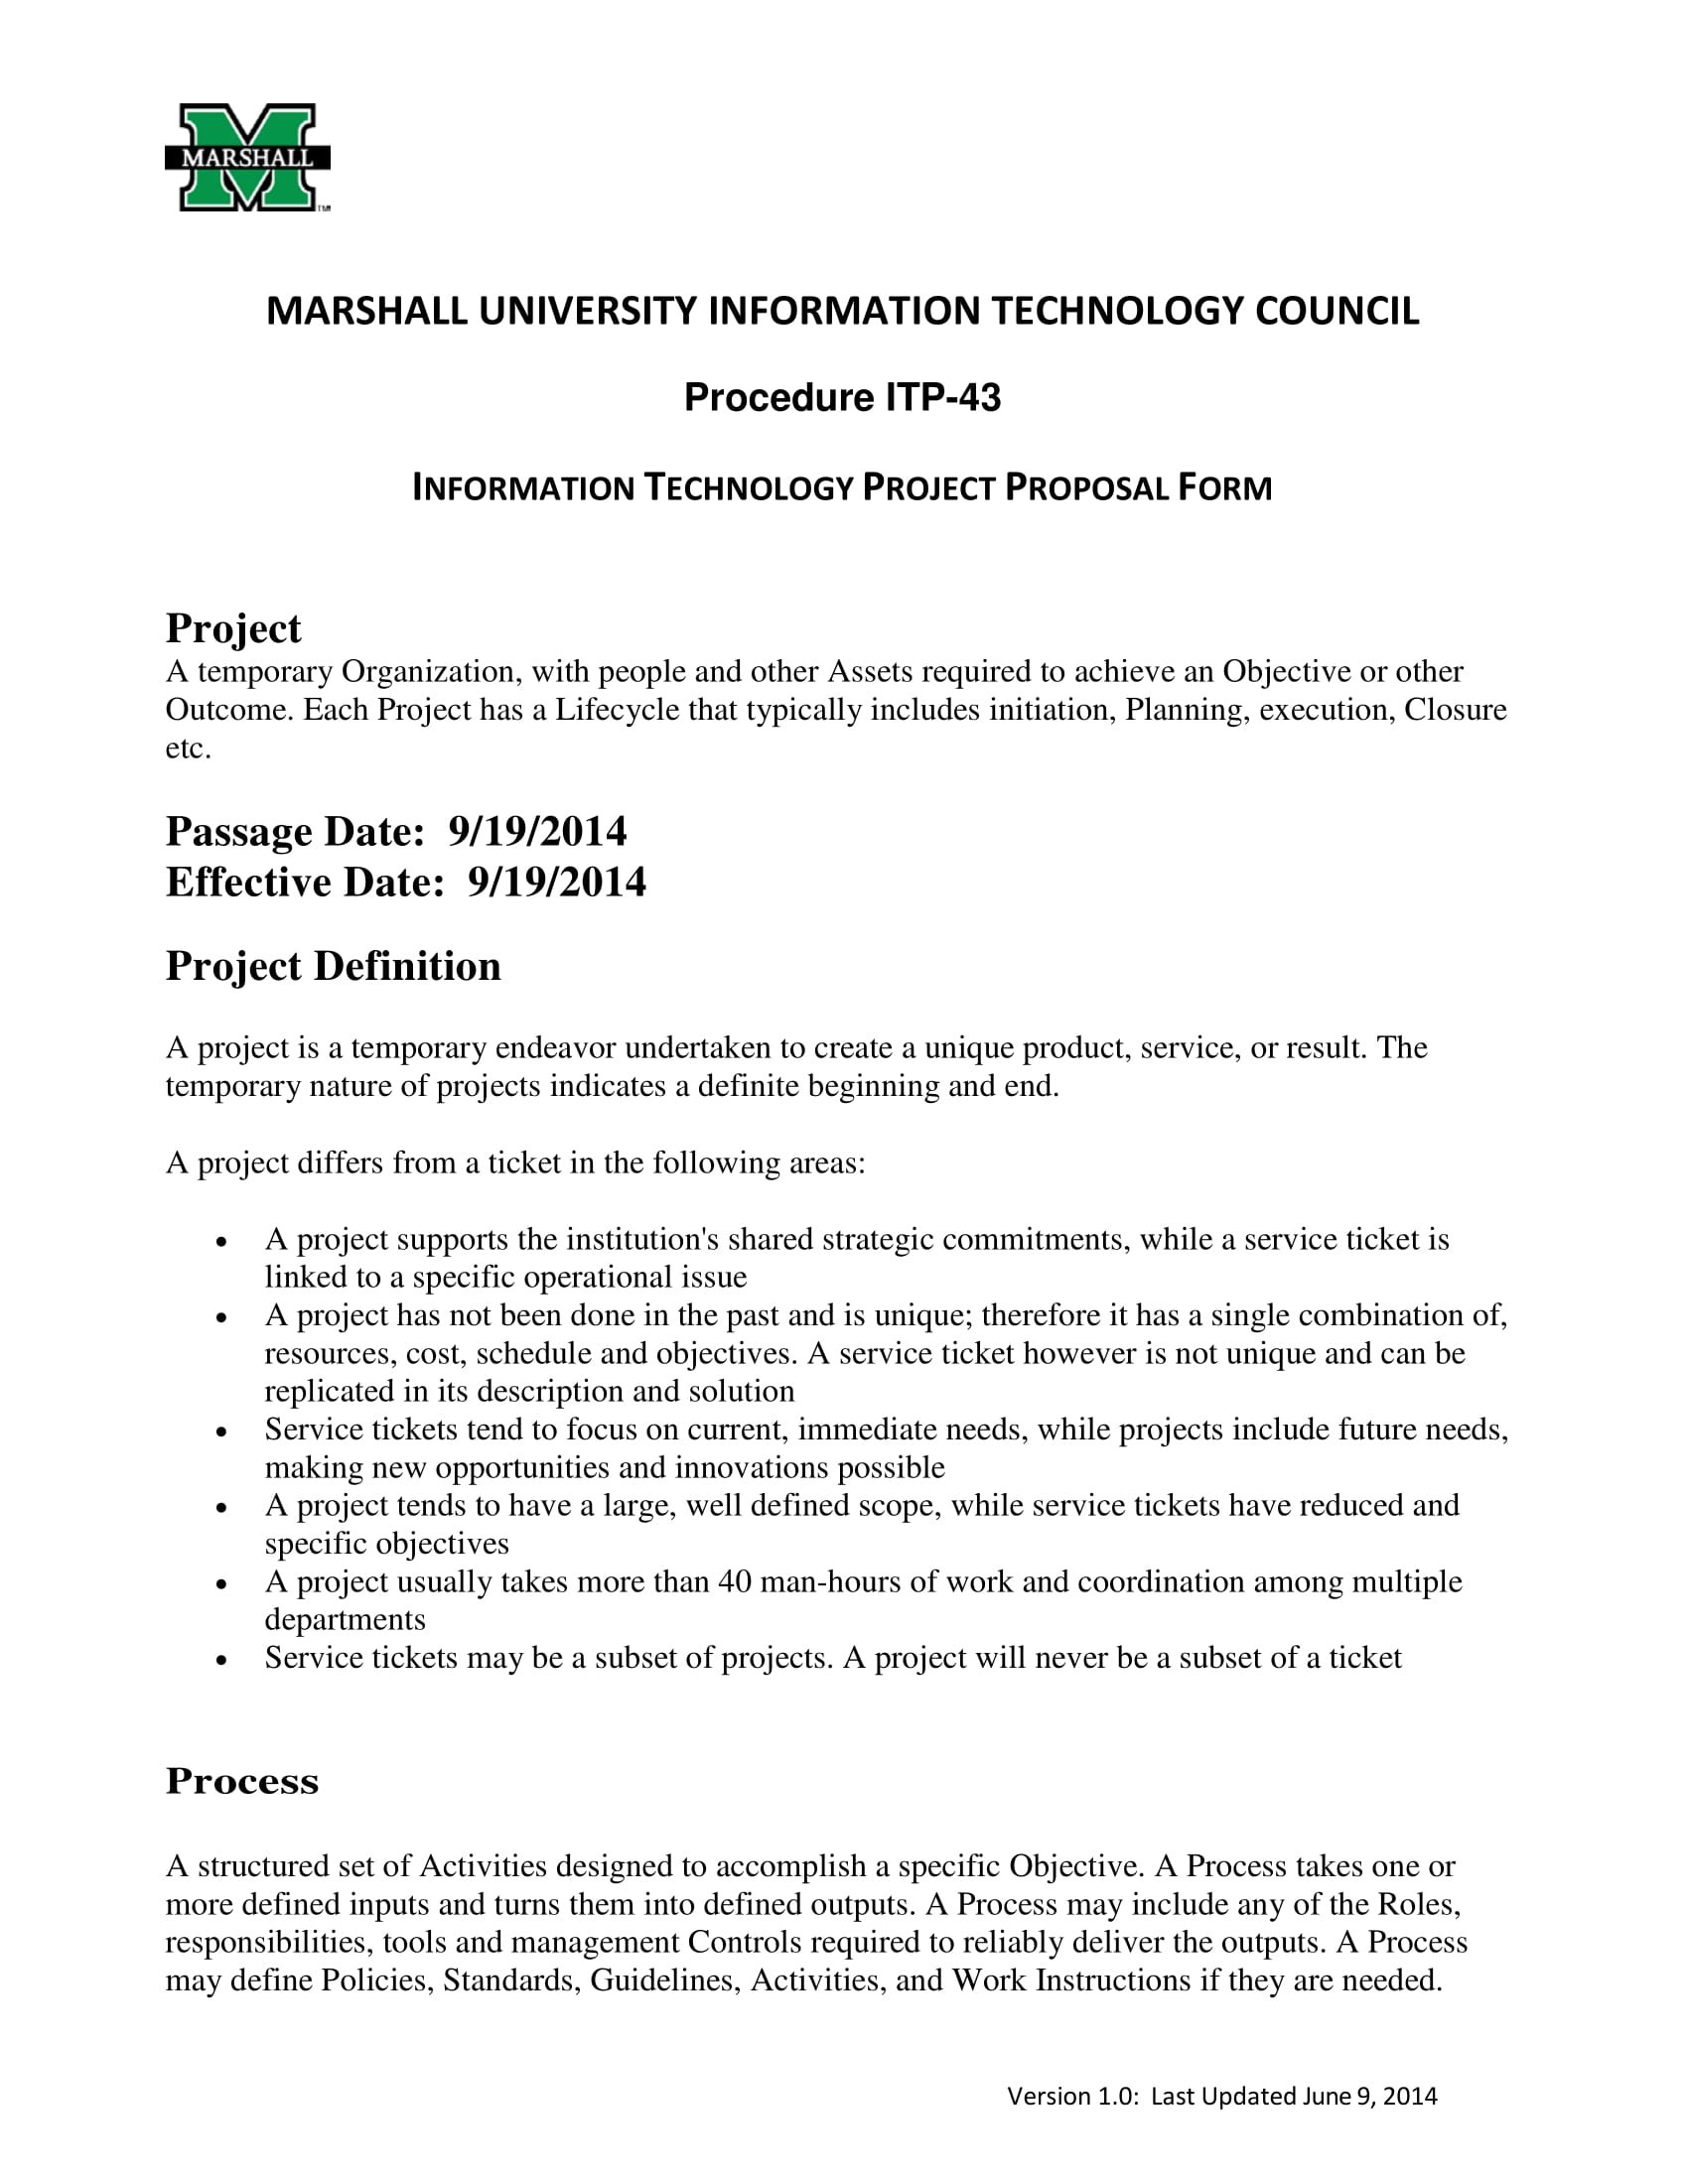 Information Technology Project Proposal Examples  Pdf Word with Technology Proposal Template